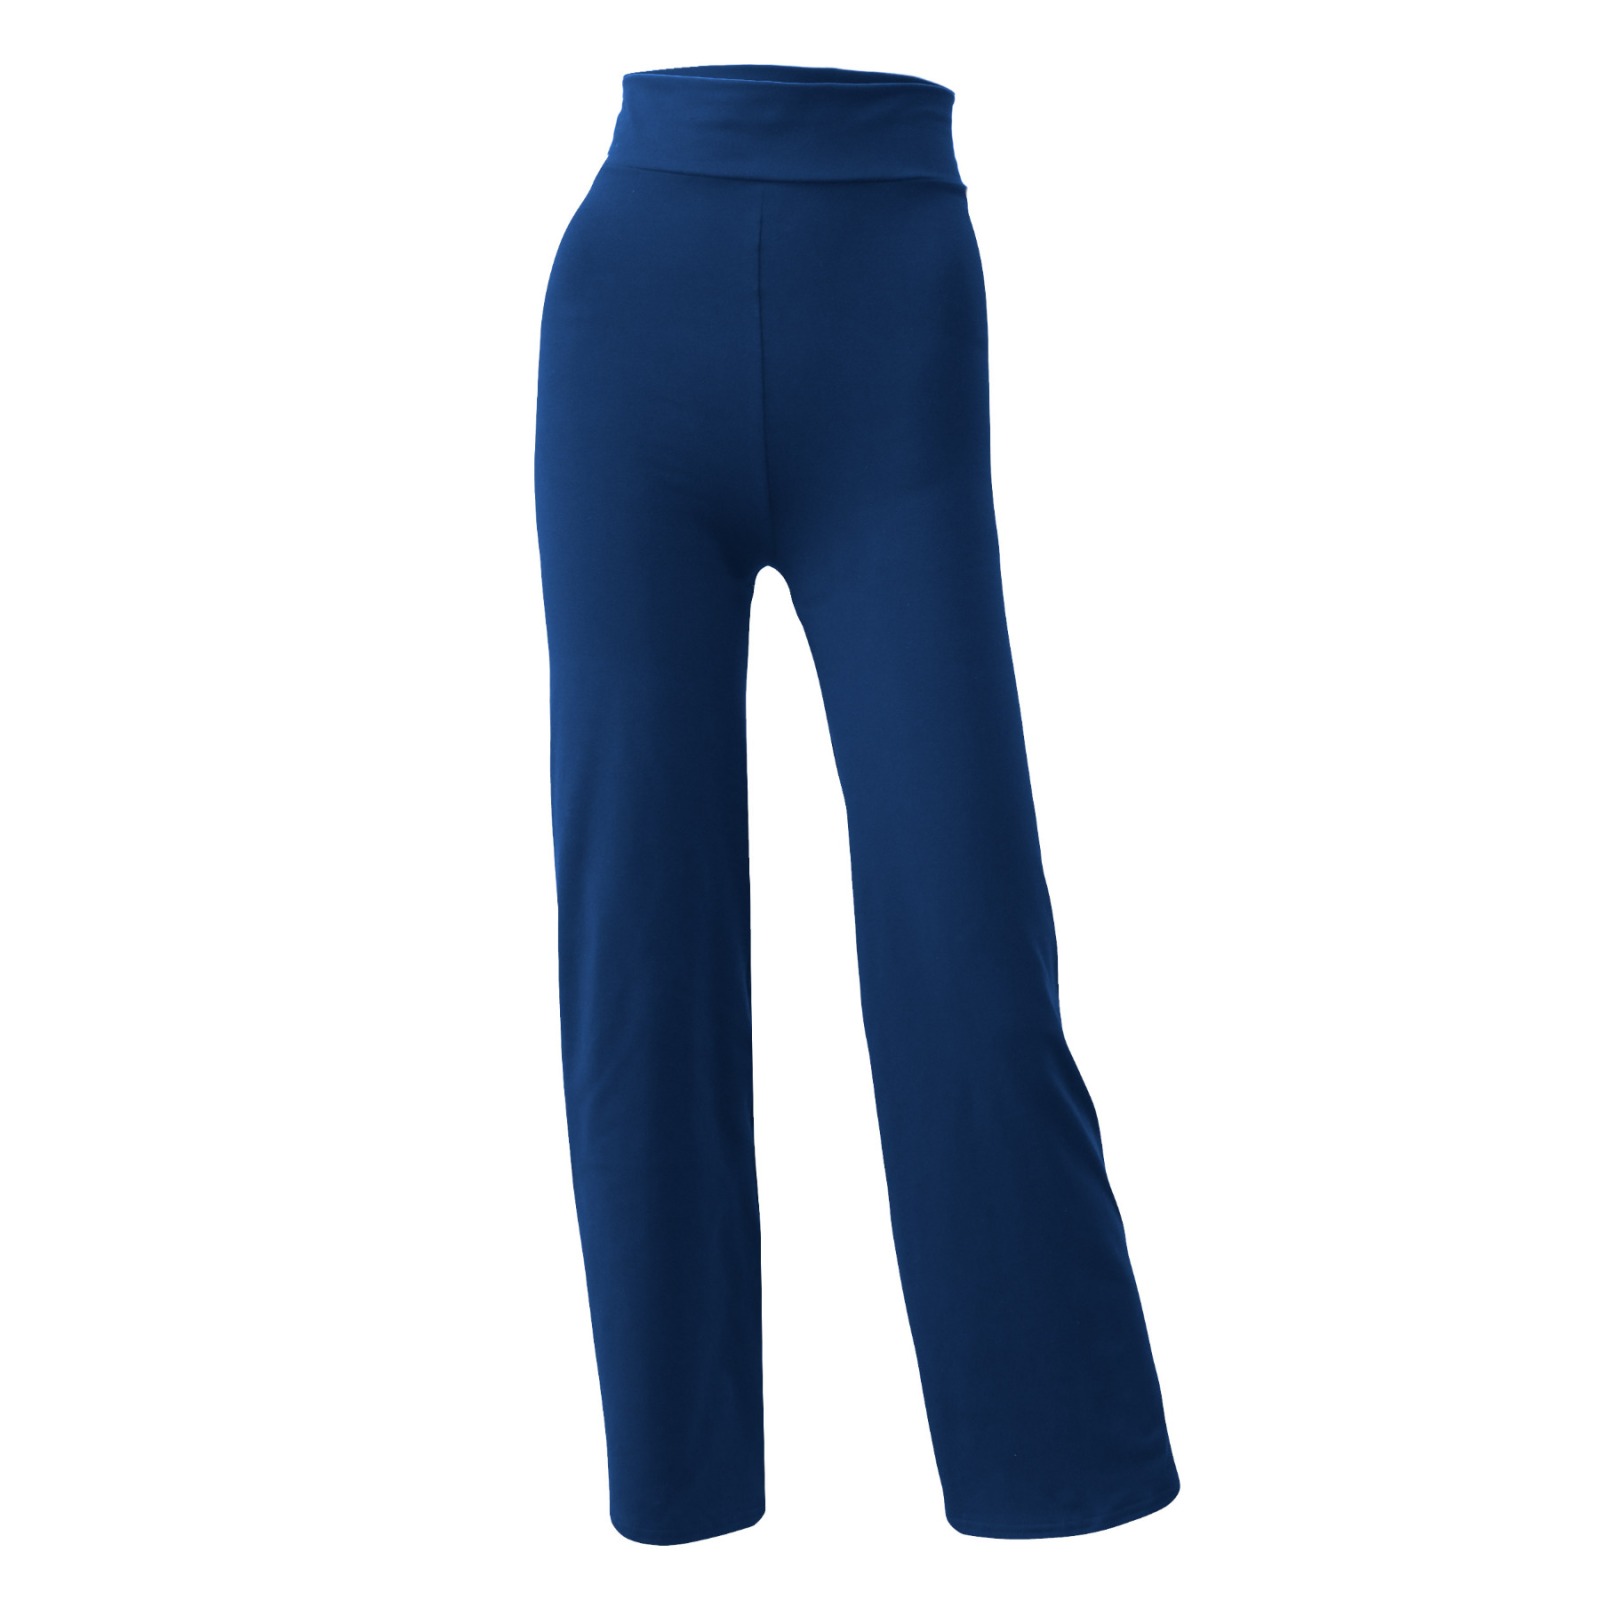 Yoga pants Relaxed Fit dark blue, Online Shop